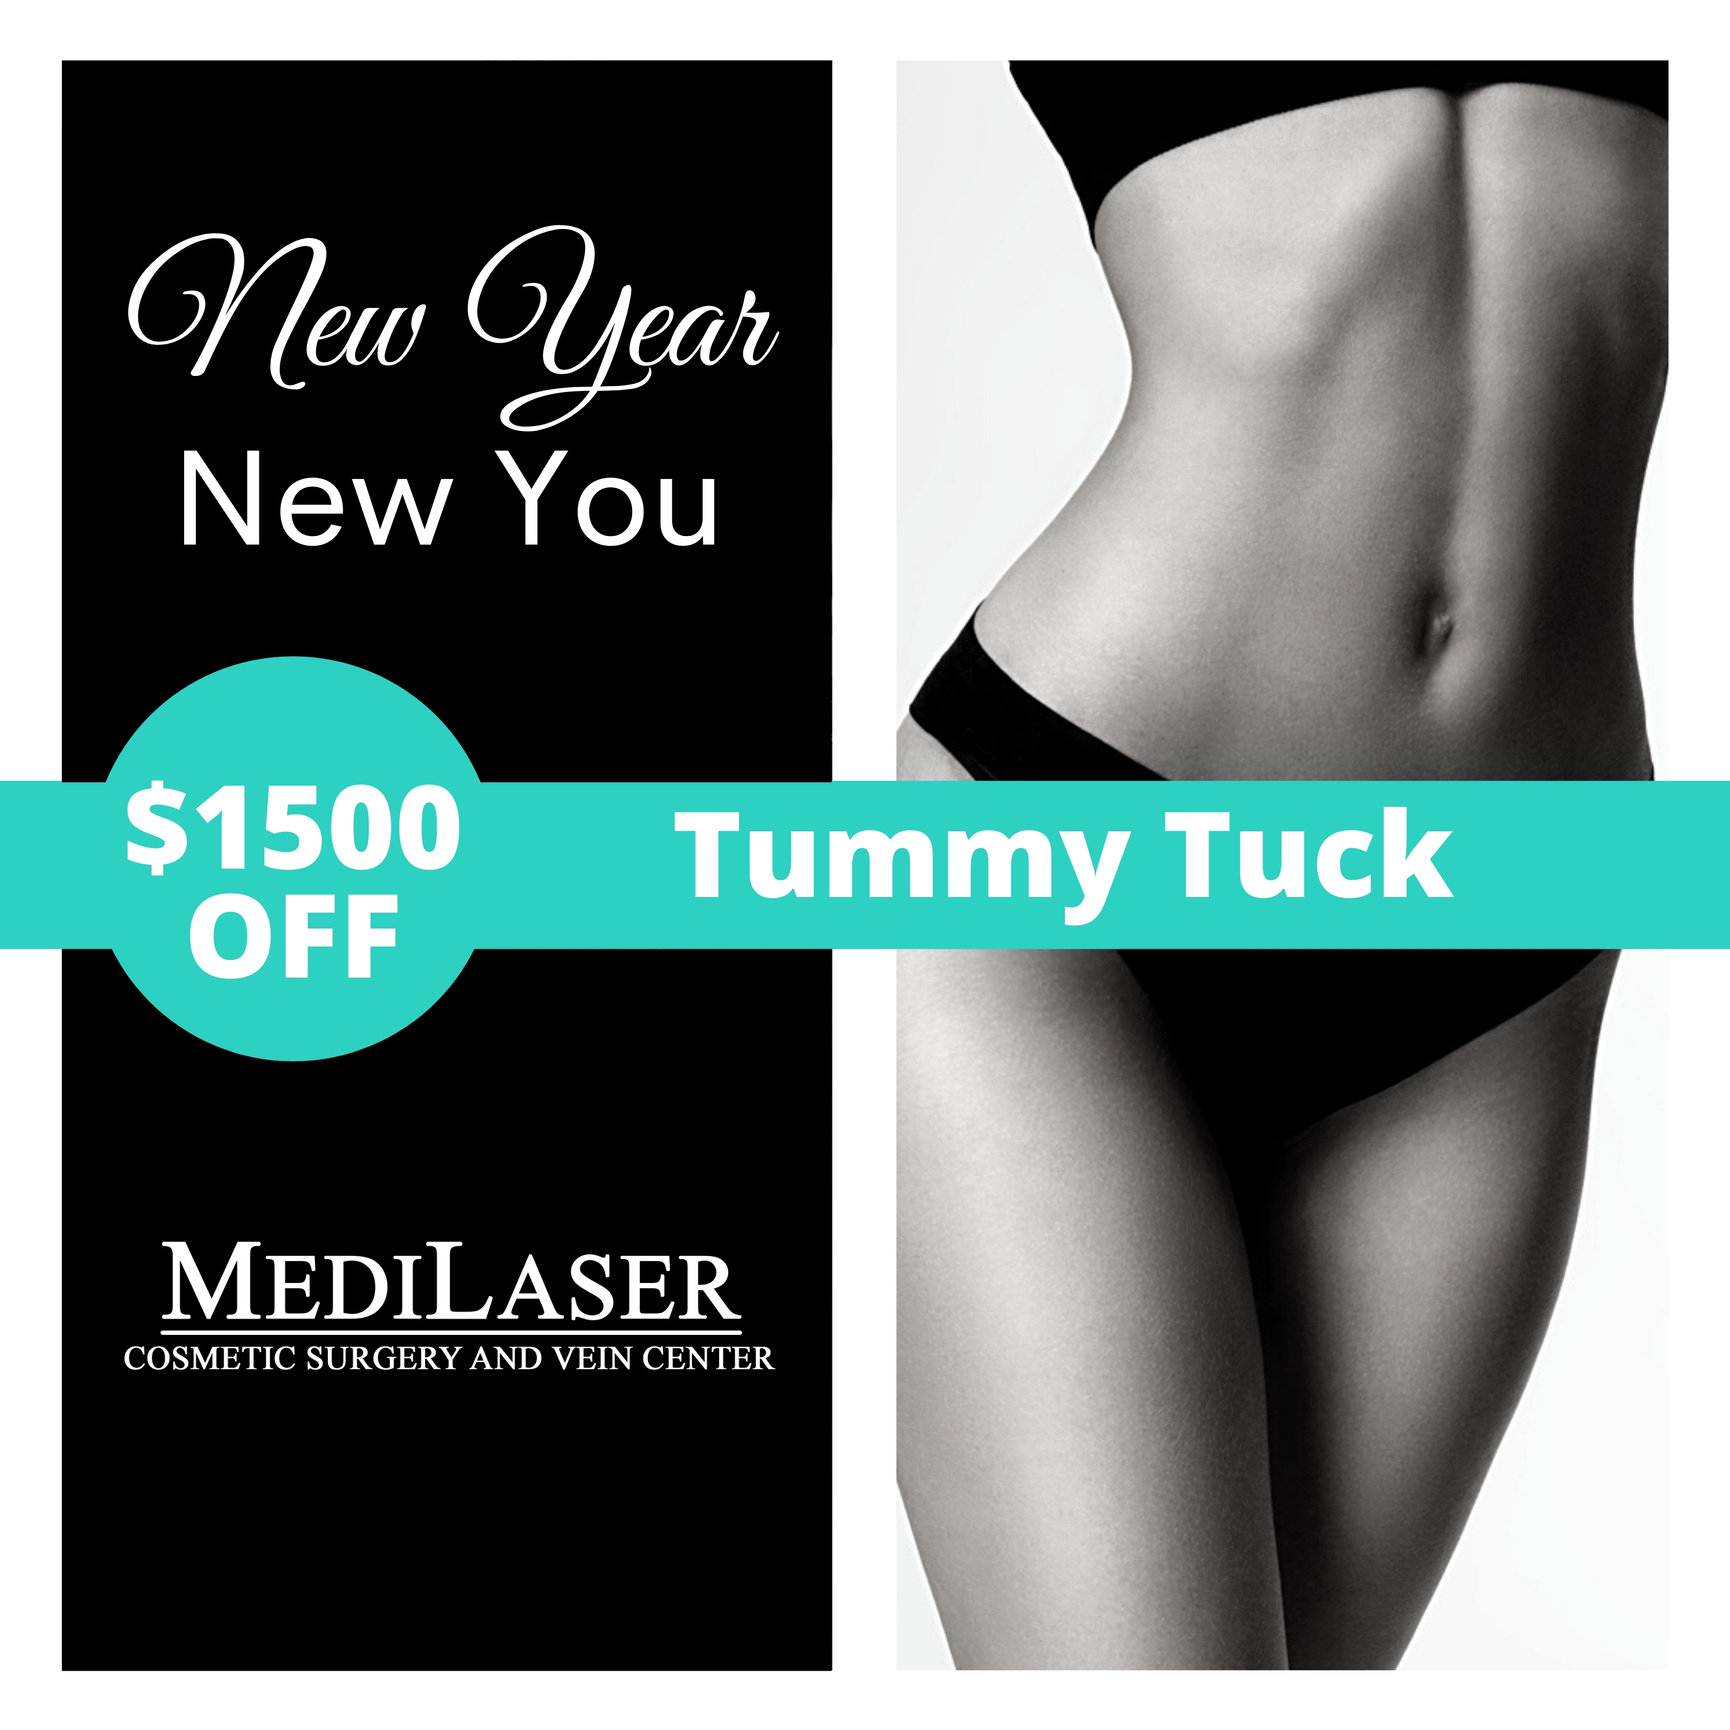 New Year, New You With A Tummy Tuck! - Medilaser Surgery and Vein Center